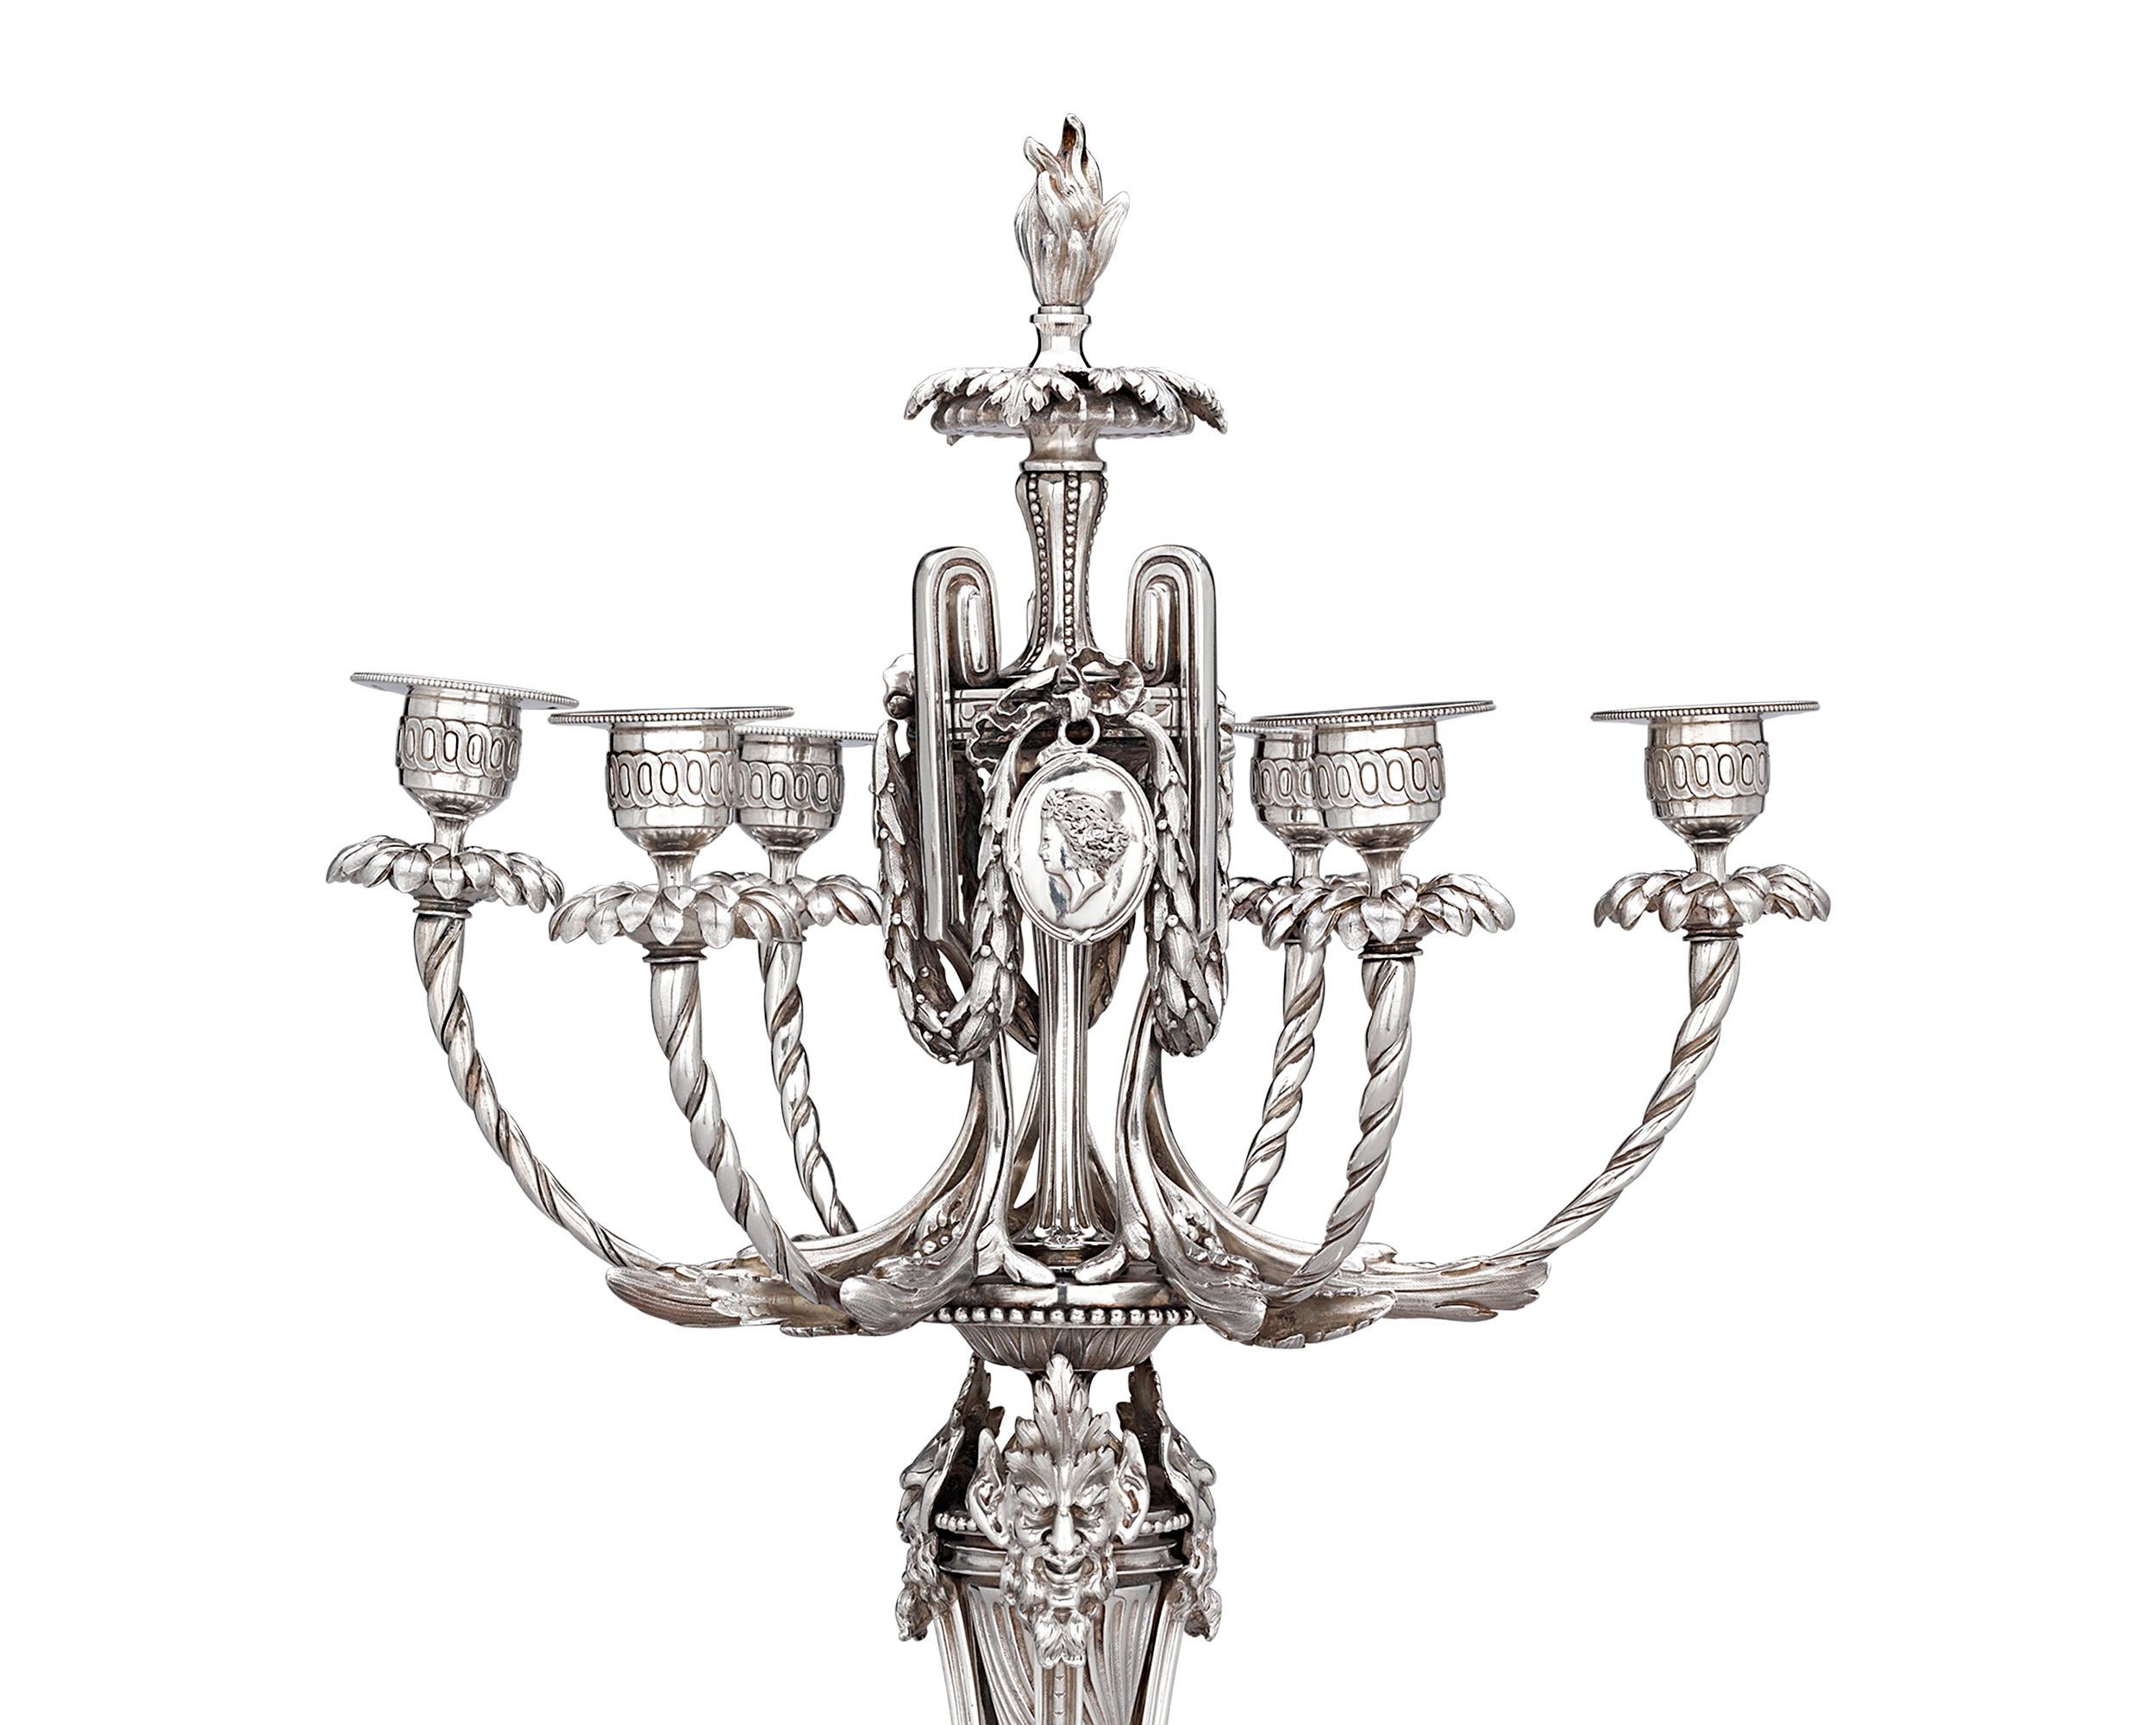 French Neoclassical Silver Plate Candelabra by Christofle